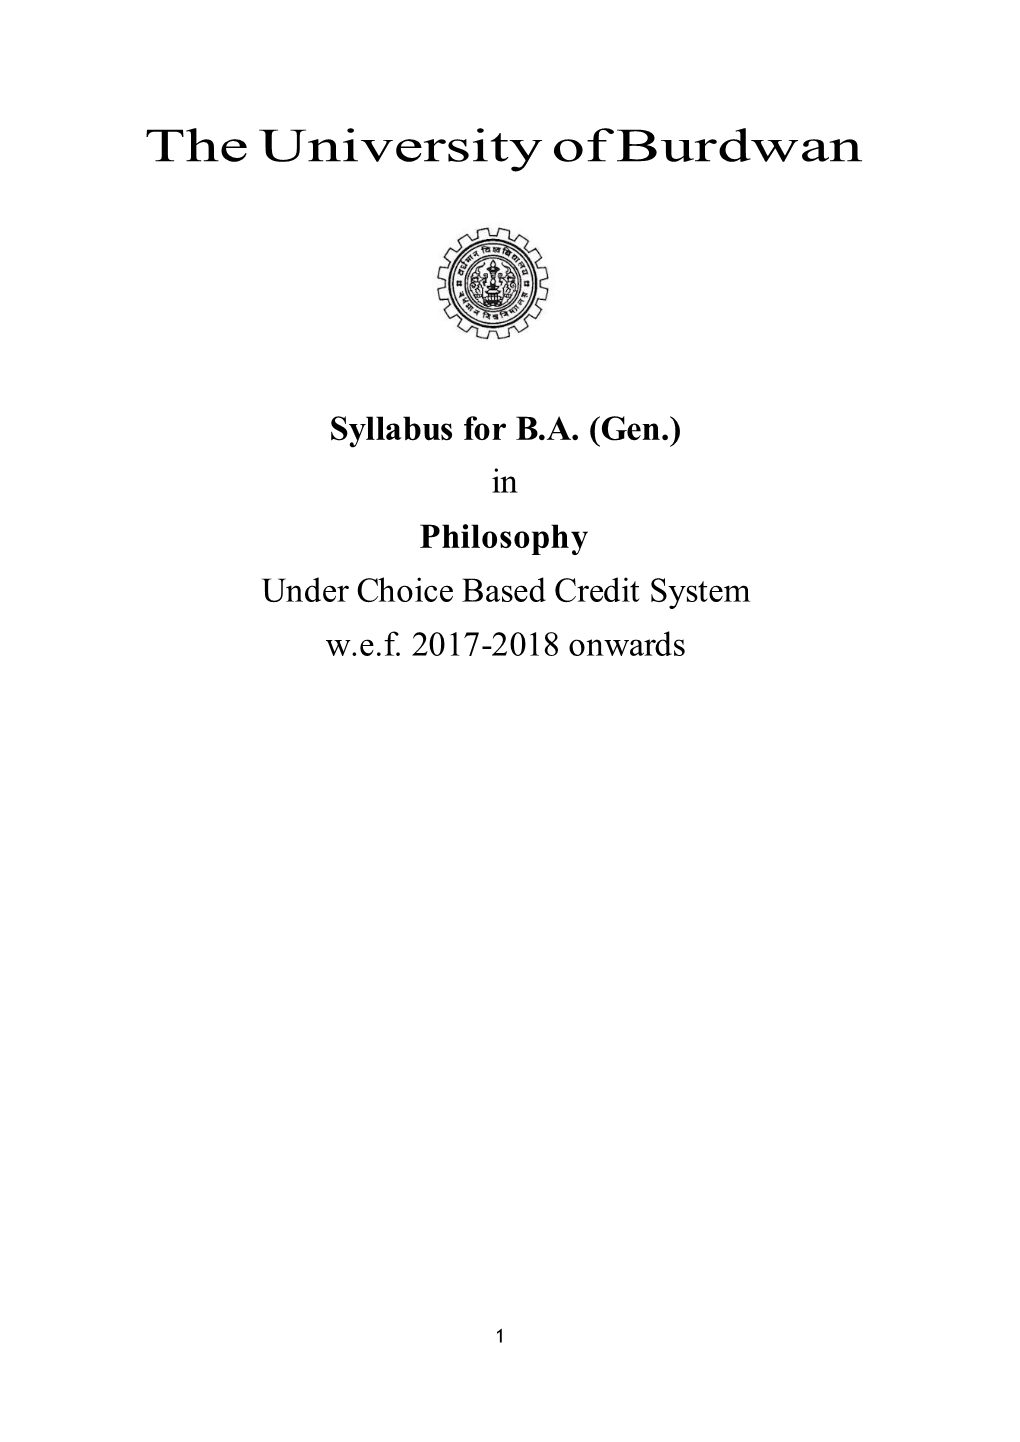 Syllabus for BA (Gen.) in Philosophy Under Choice Based Credit System